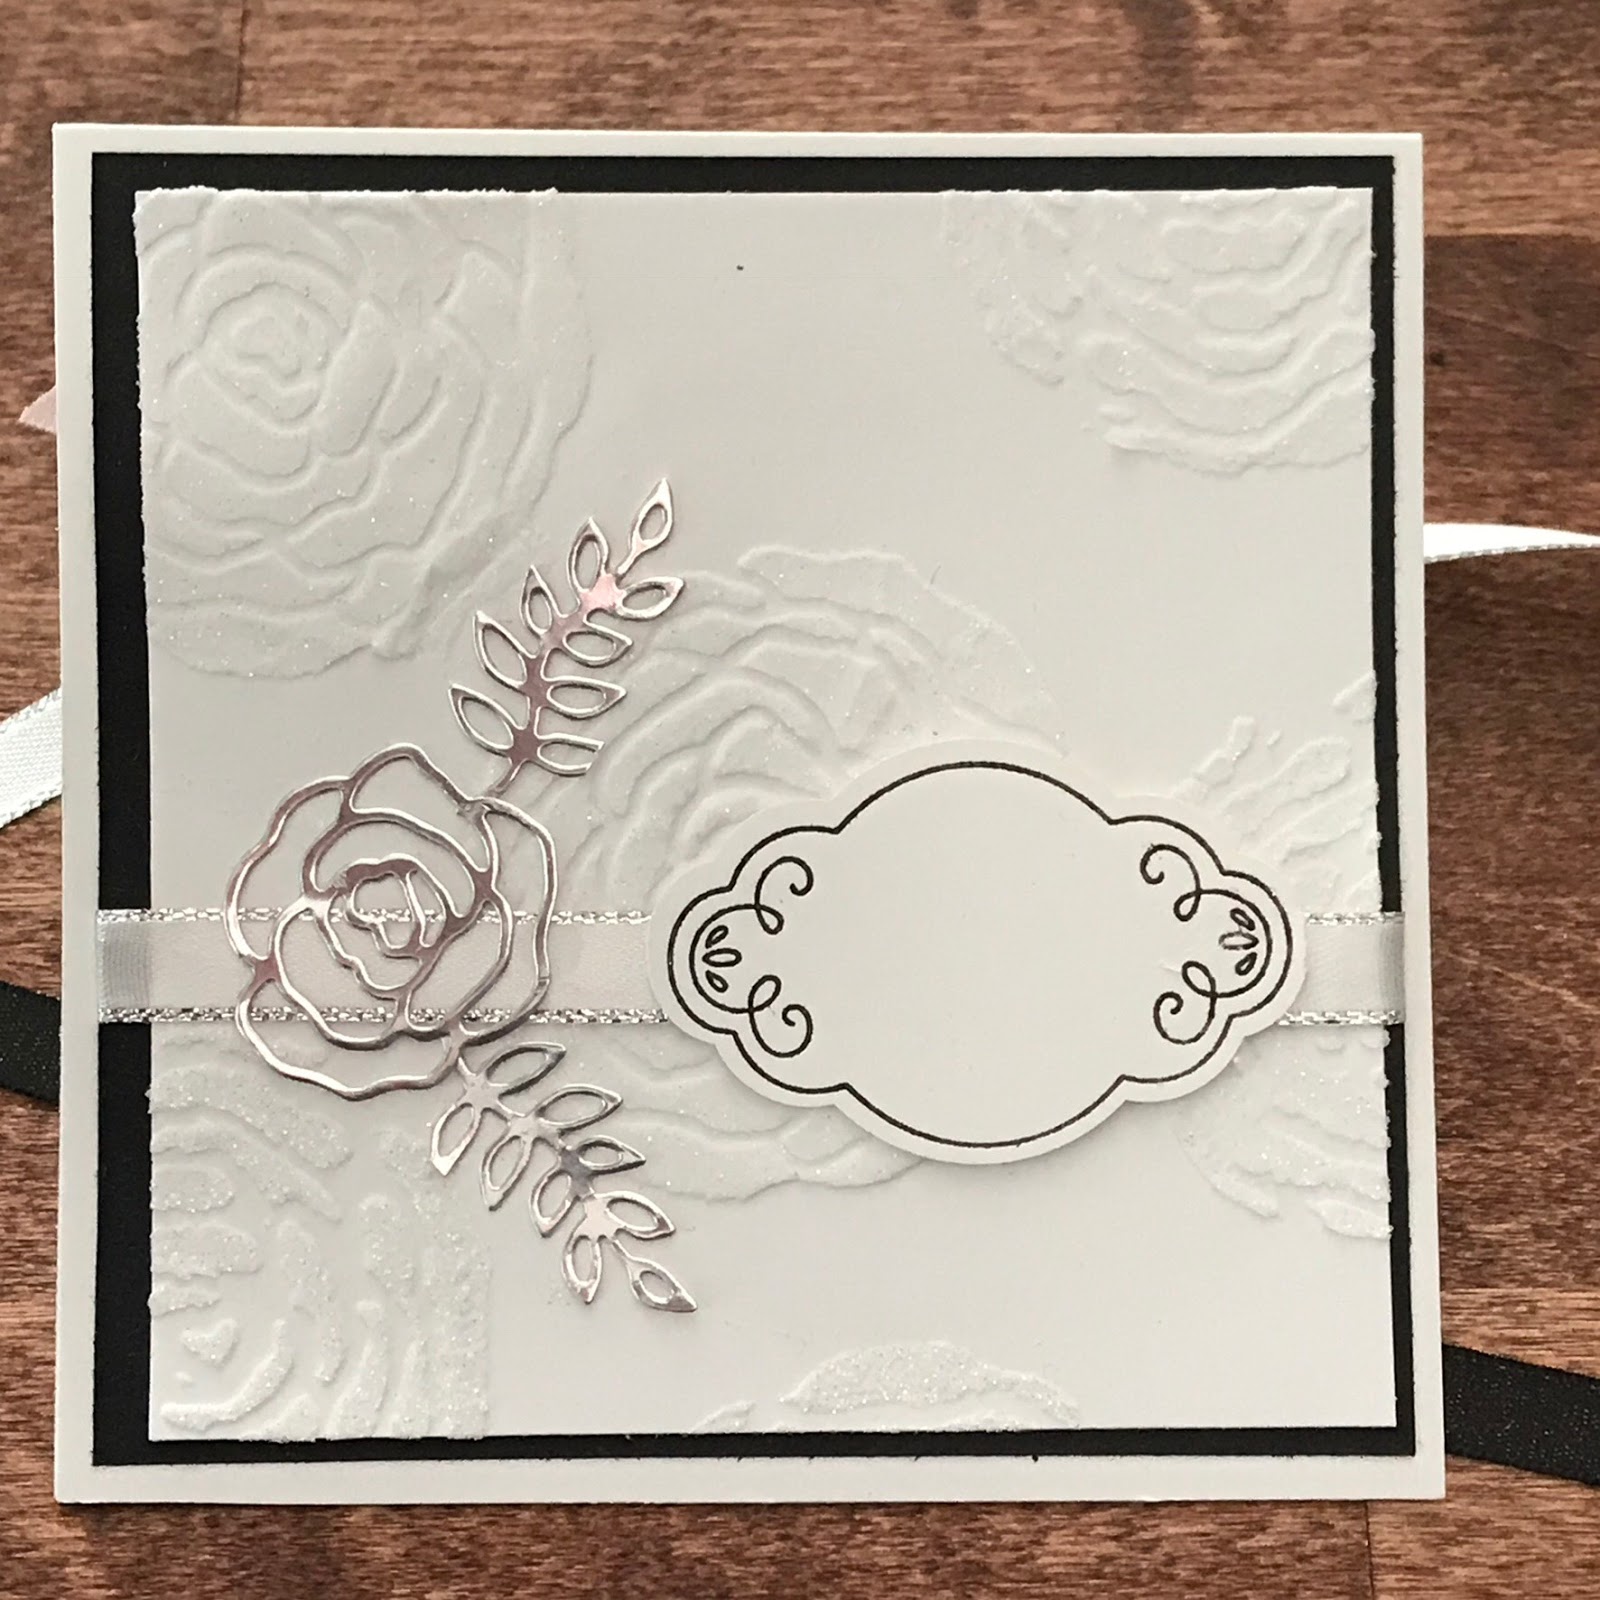 Paper Crafts By Elaine: How to use embossing paste